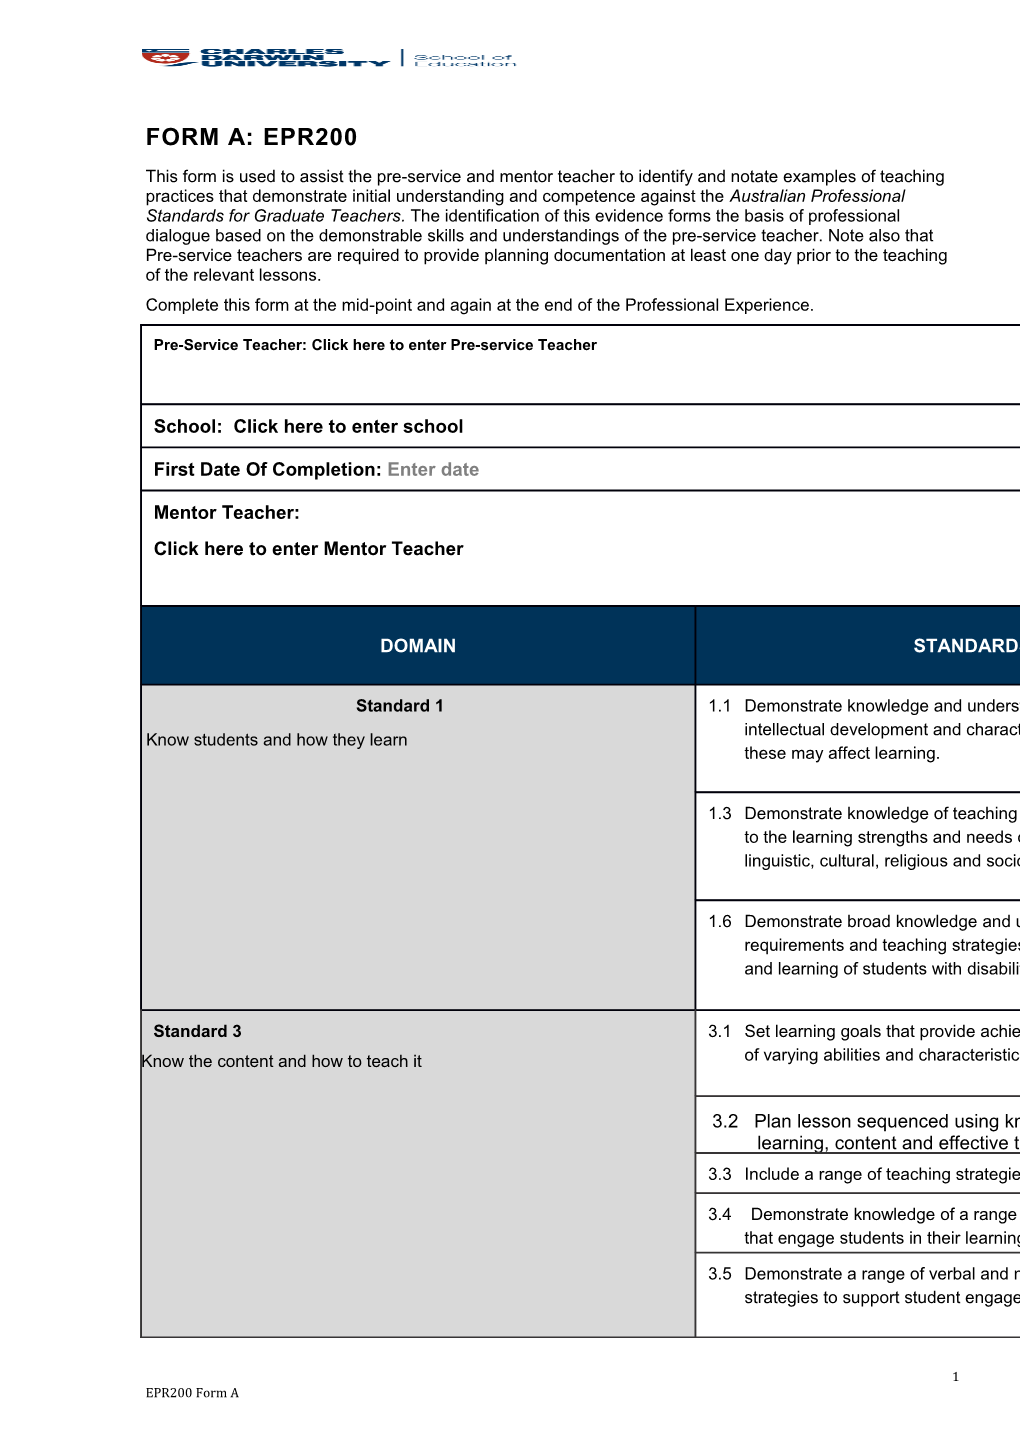 Complete This Form at the Mid-Point and Again at the End of the Professional Experience